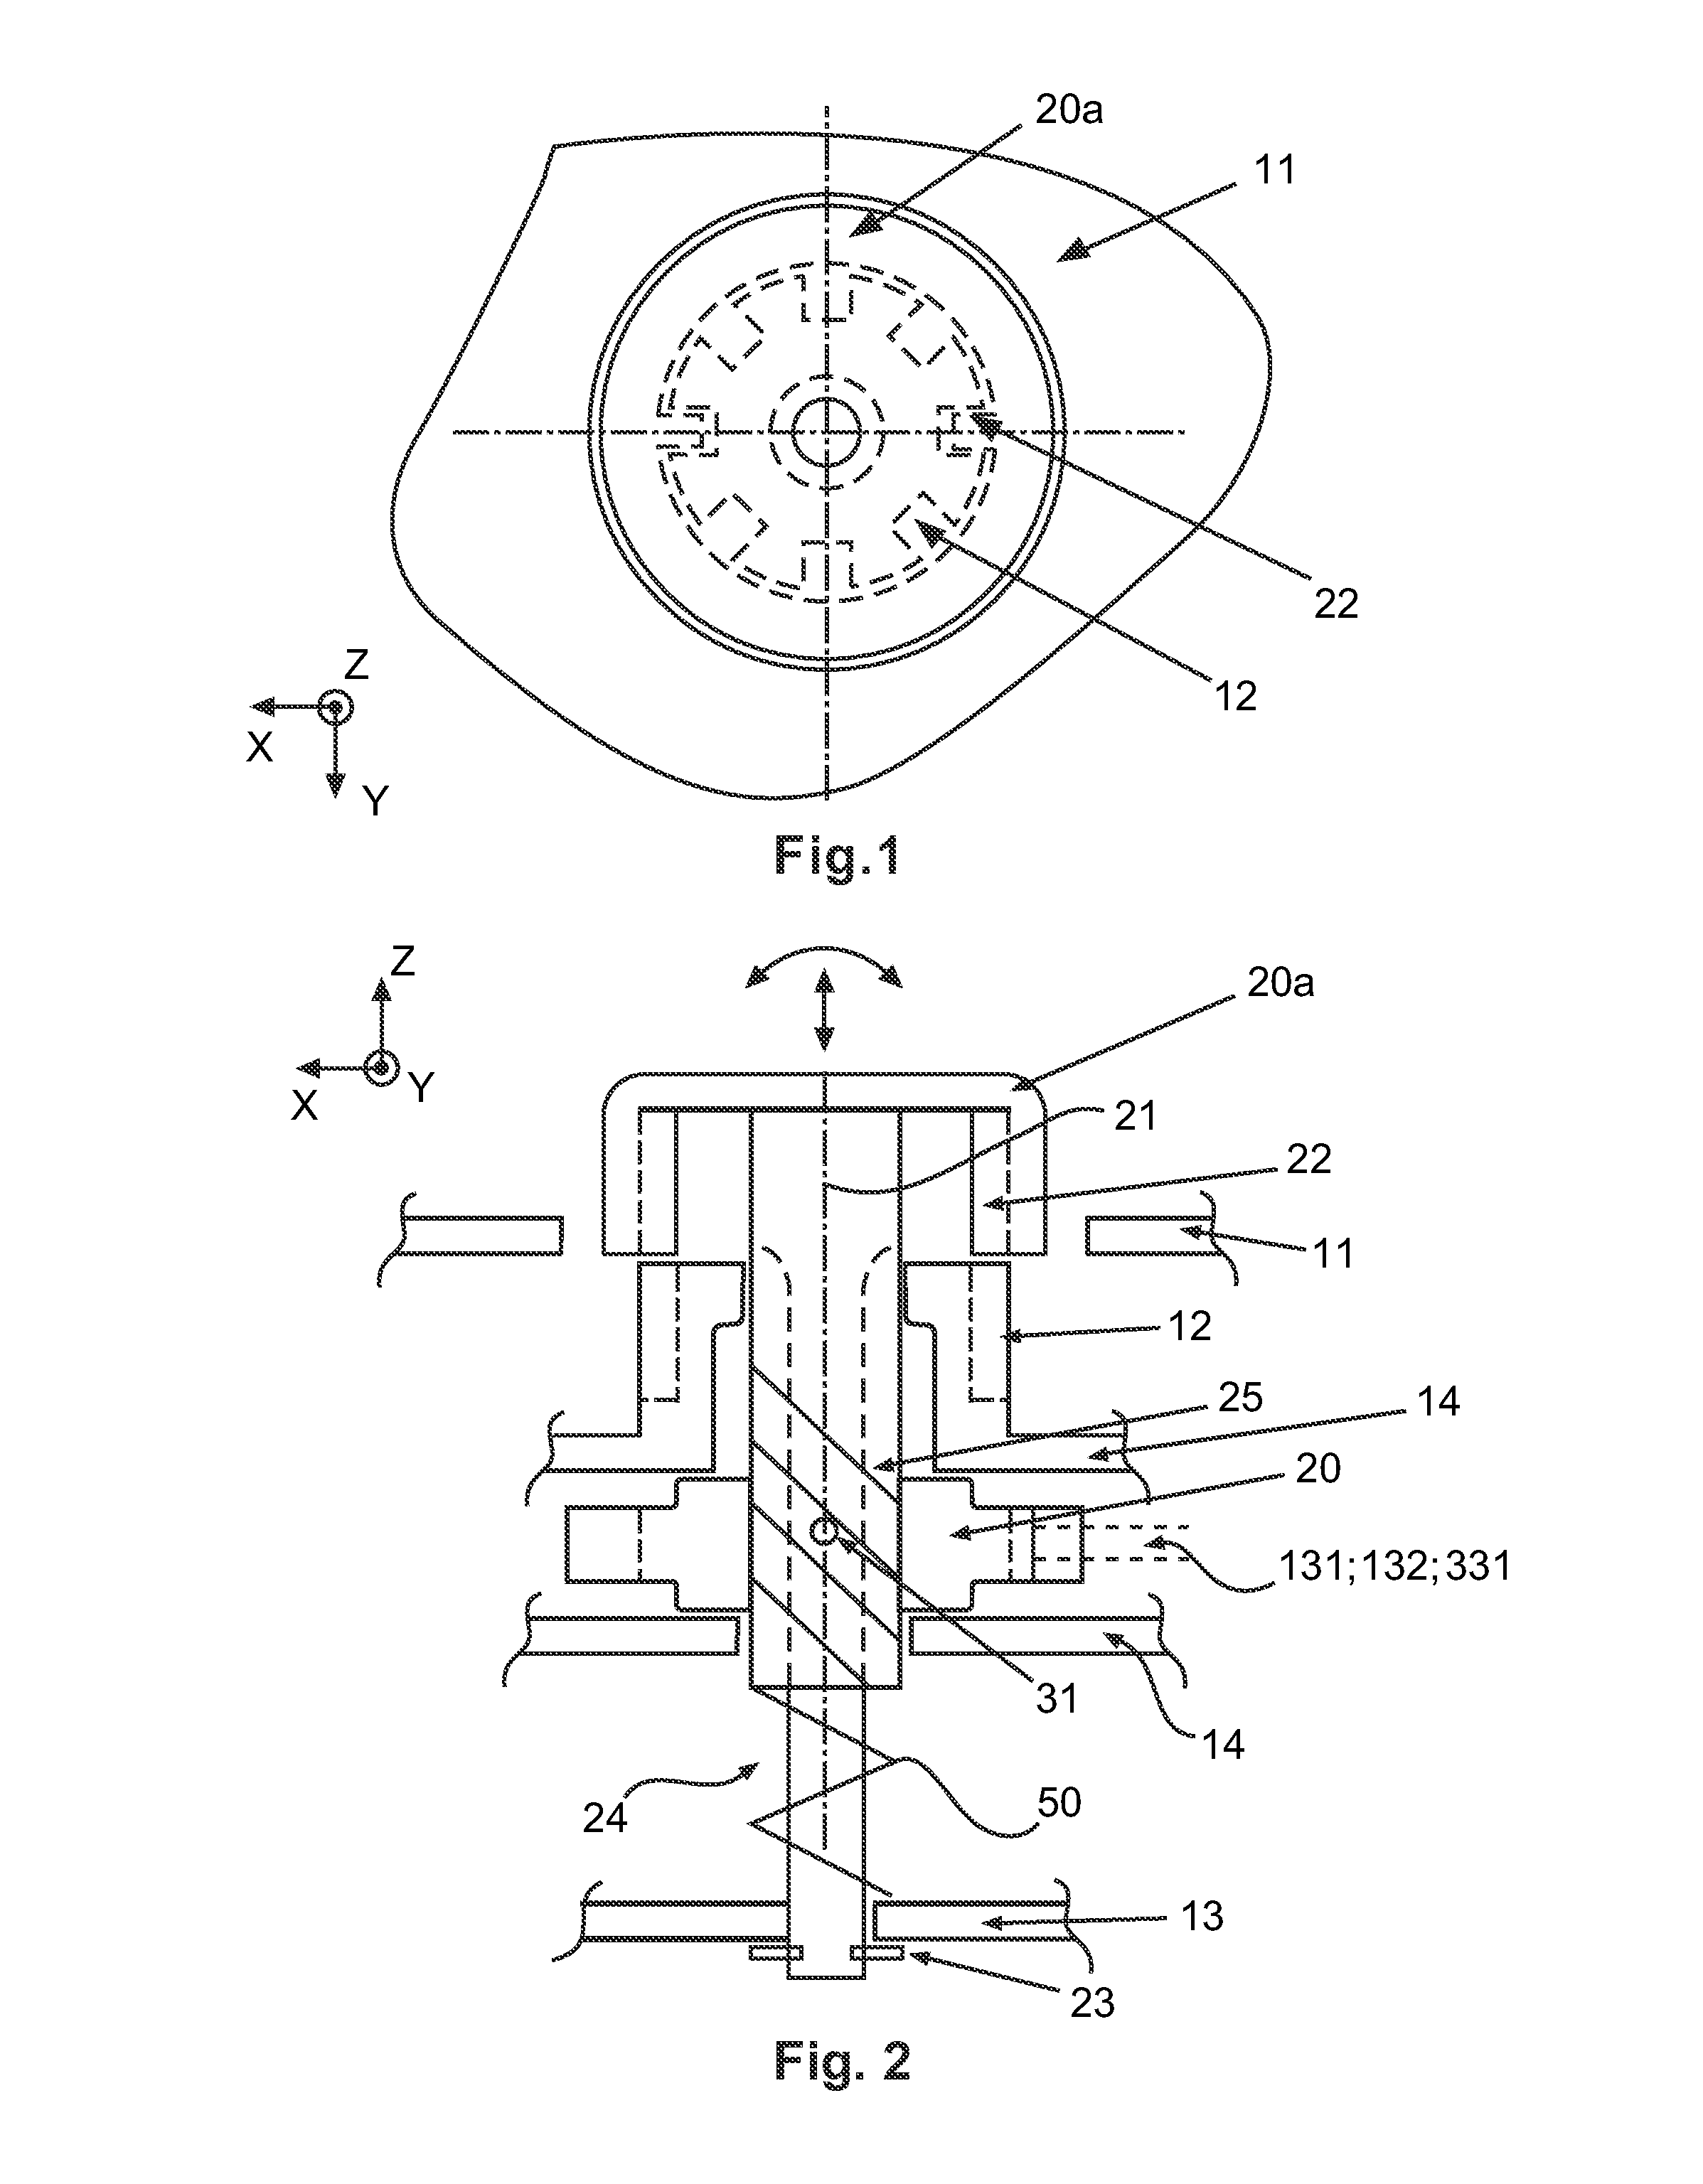 Self-powered energy harvesting switch and method for harvesting energy